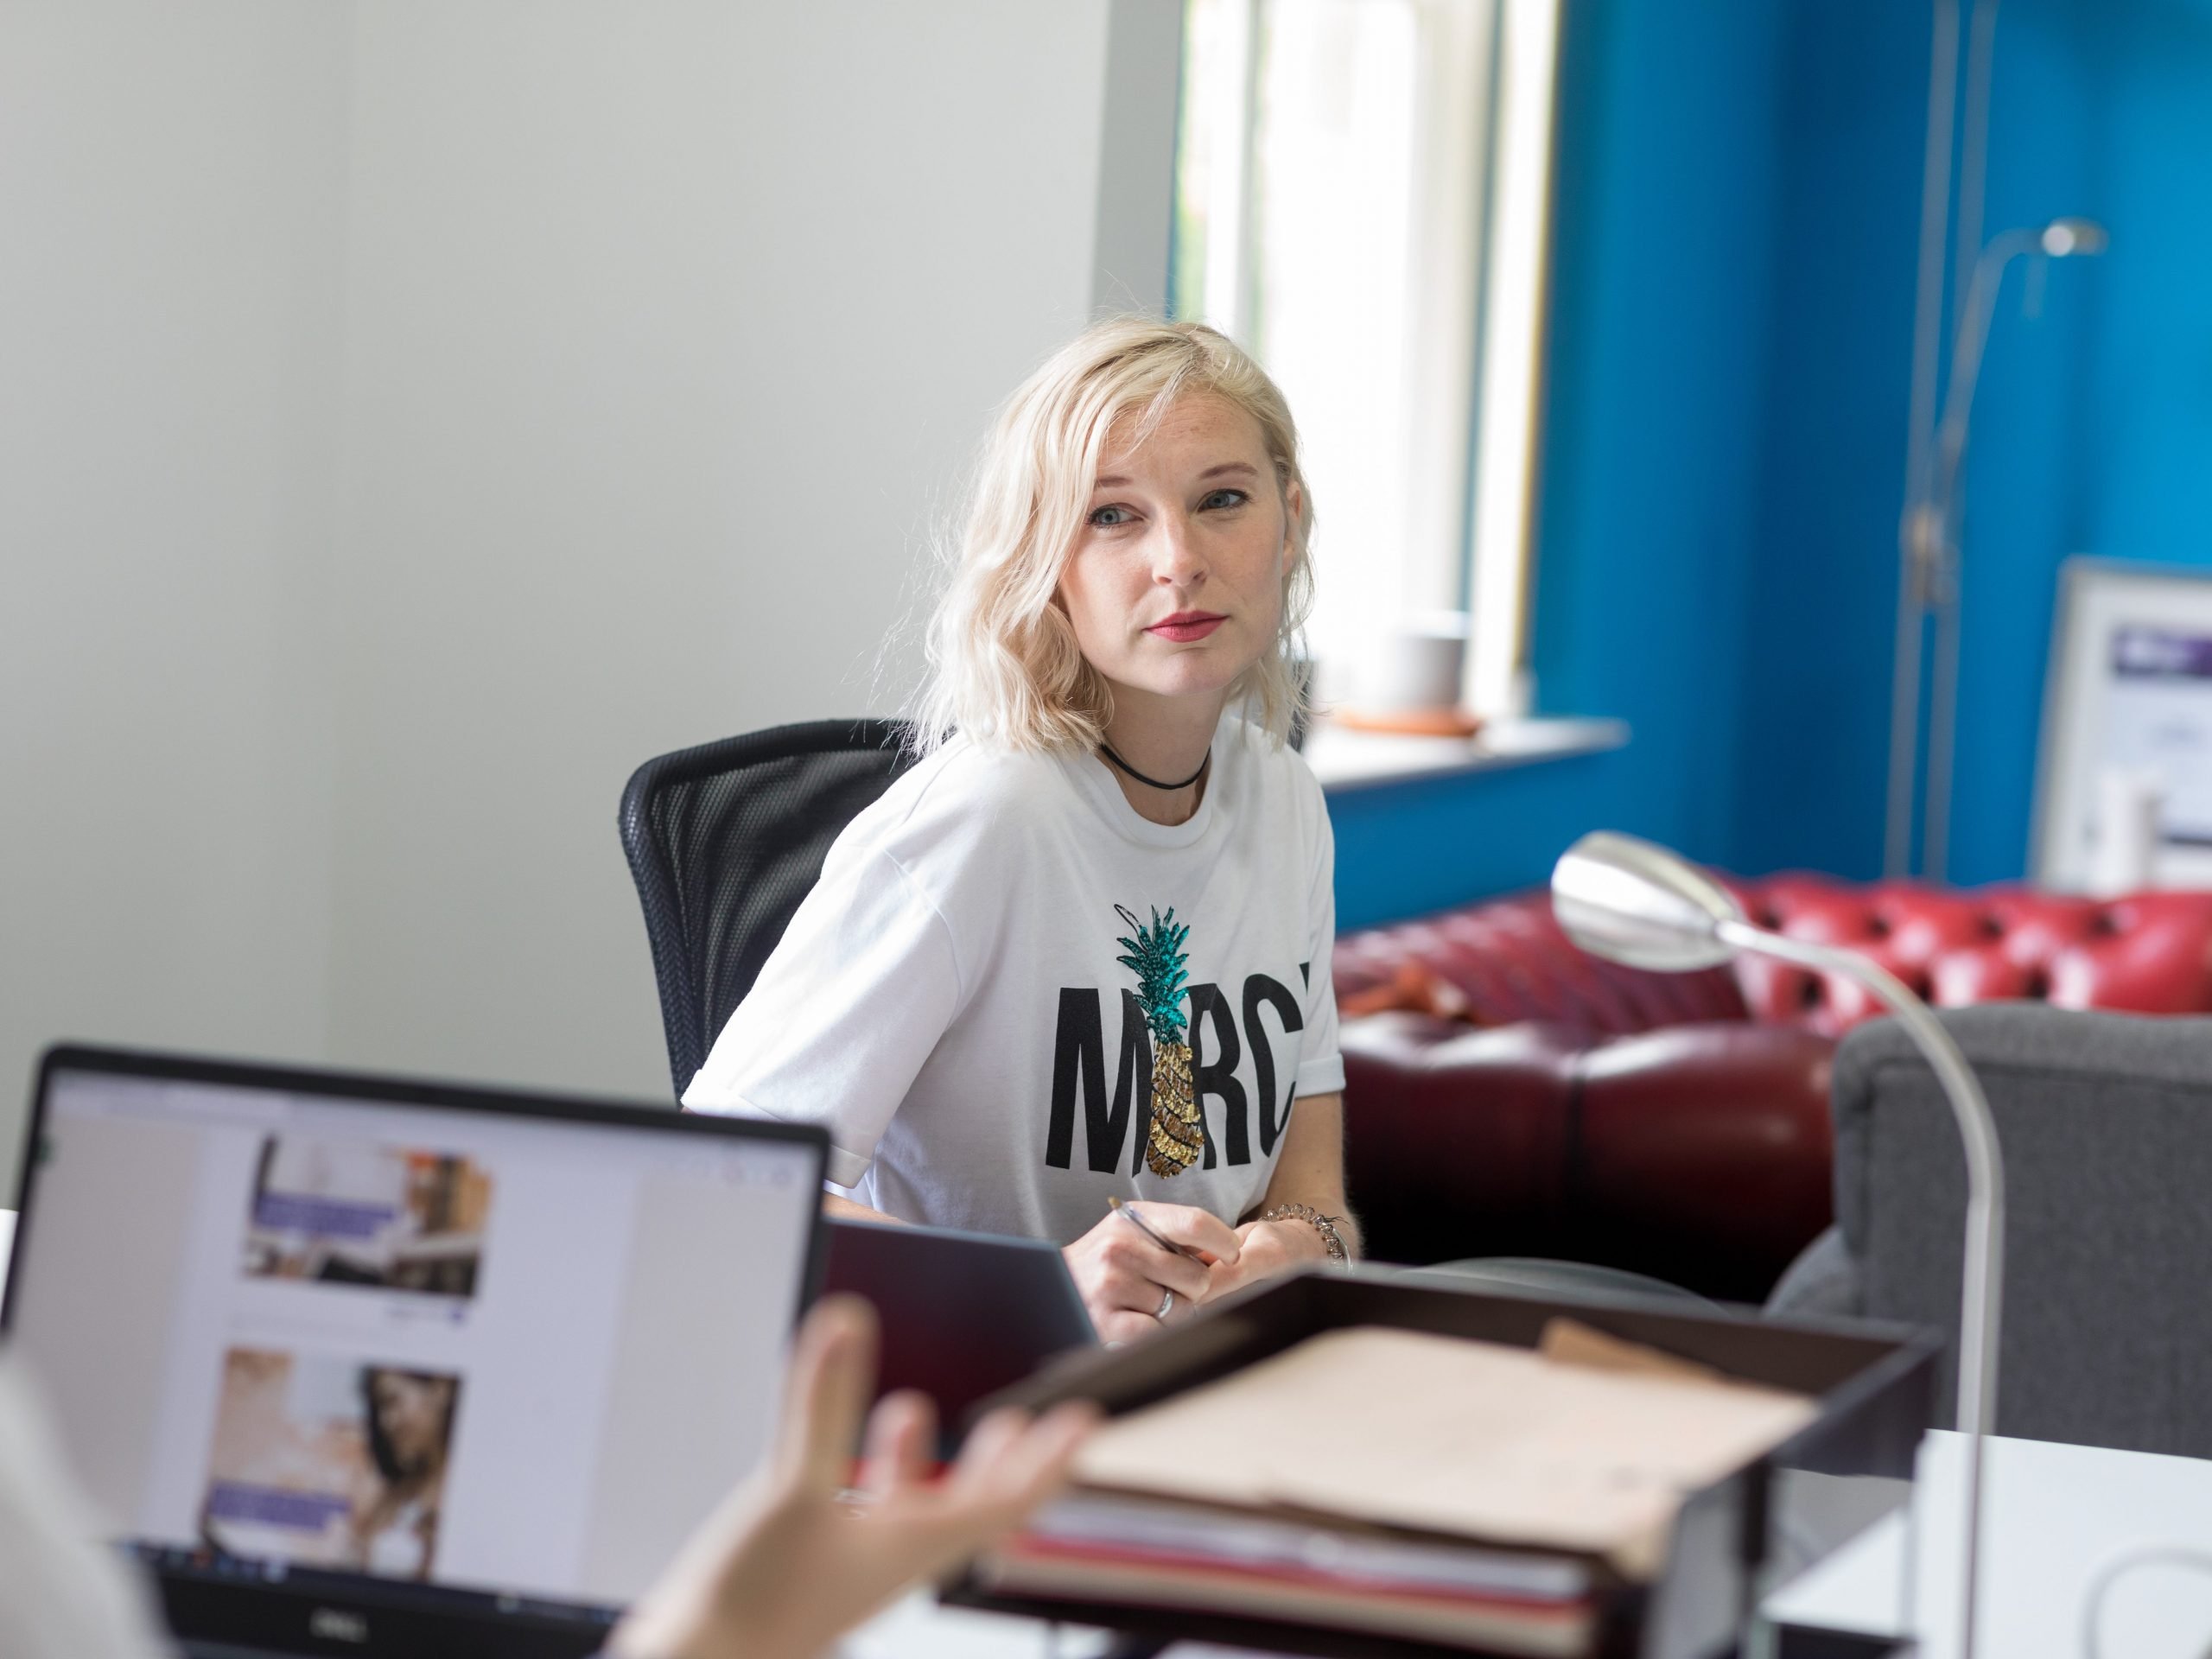 Woman with blonde hair and white t-shirt in an office